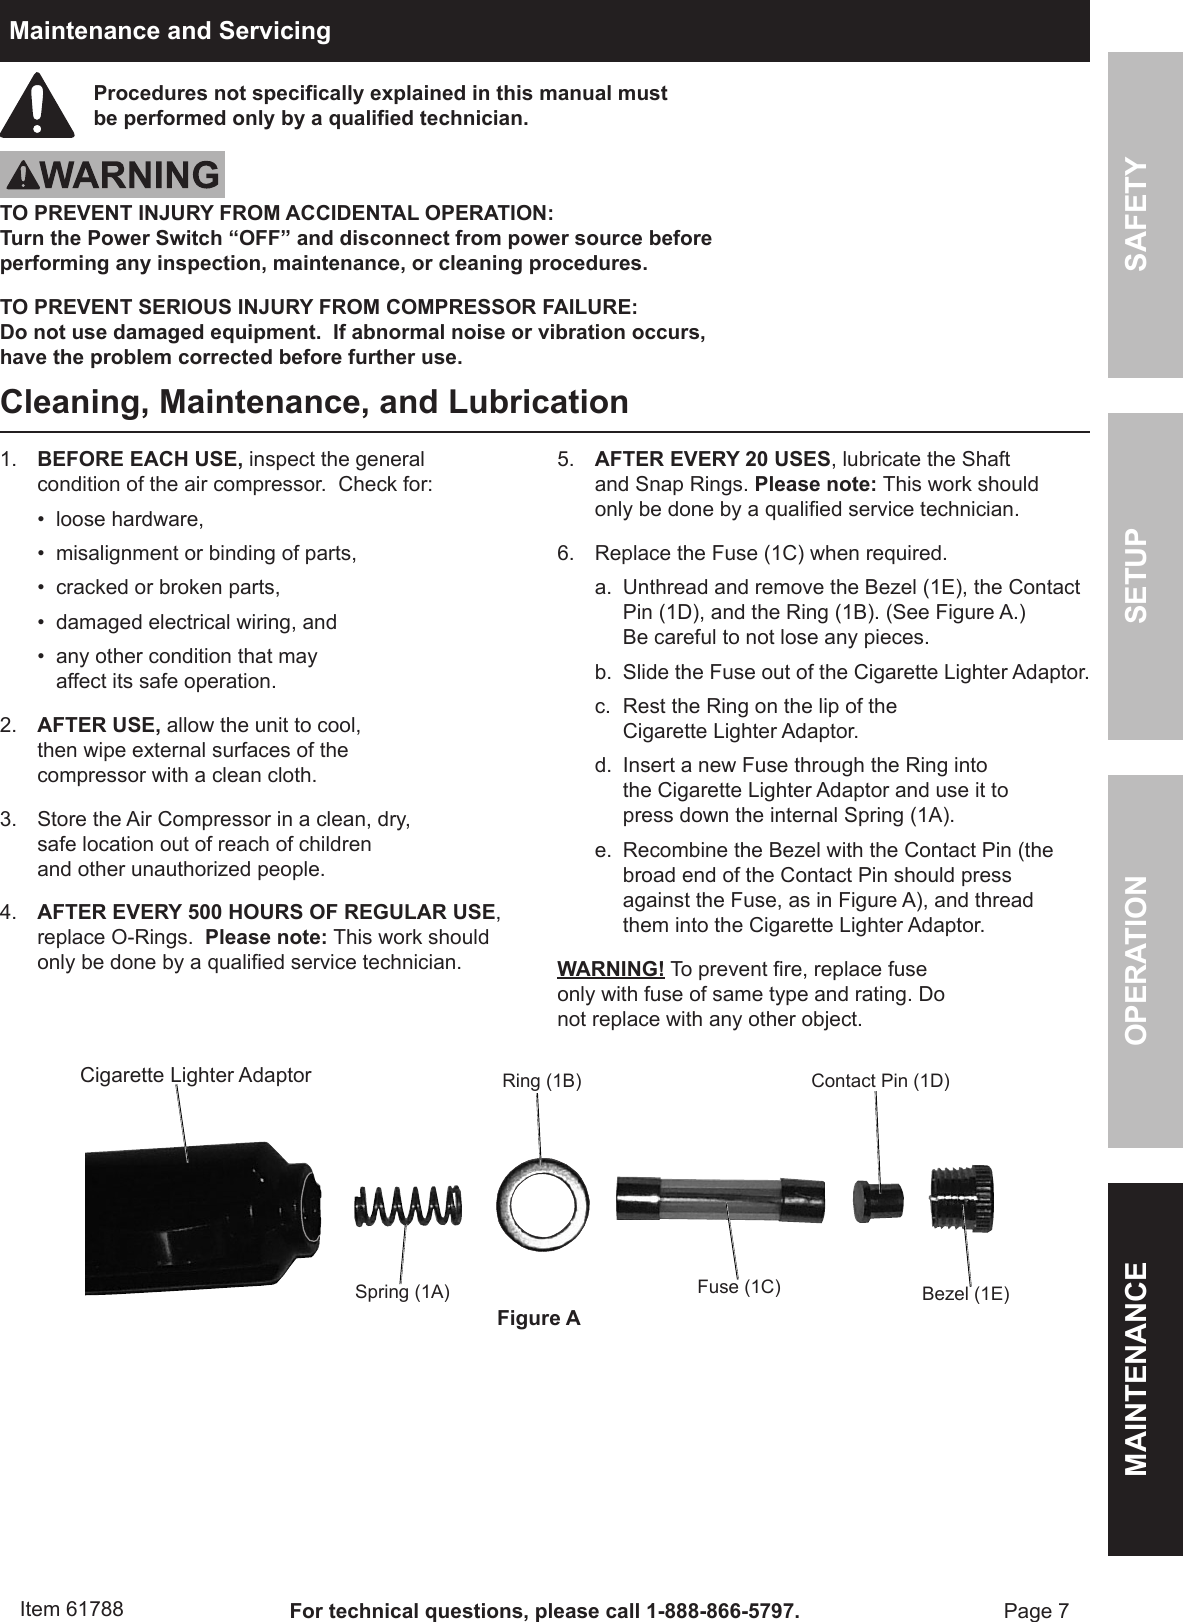 Harbor Freight 12V 100 Psi High Volume Air Compressor Product Manual